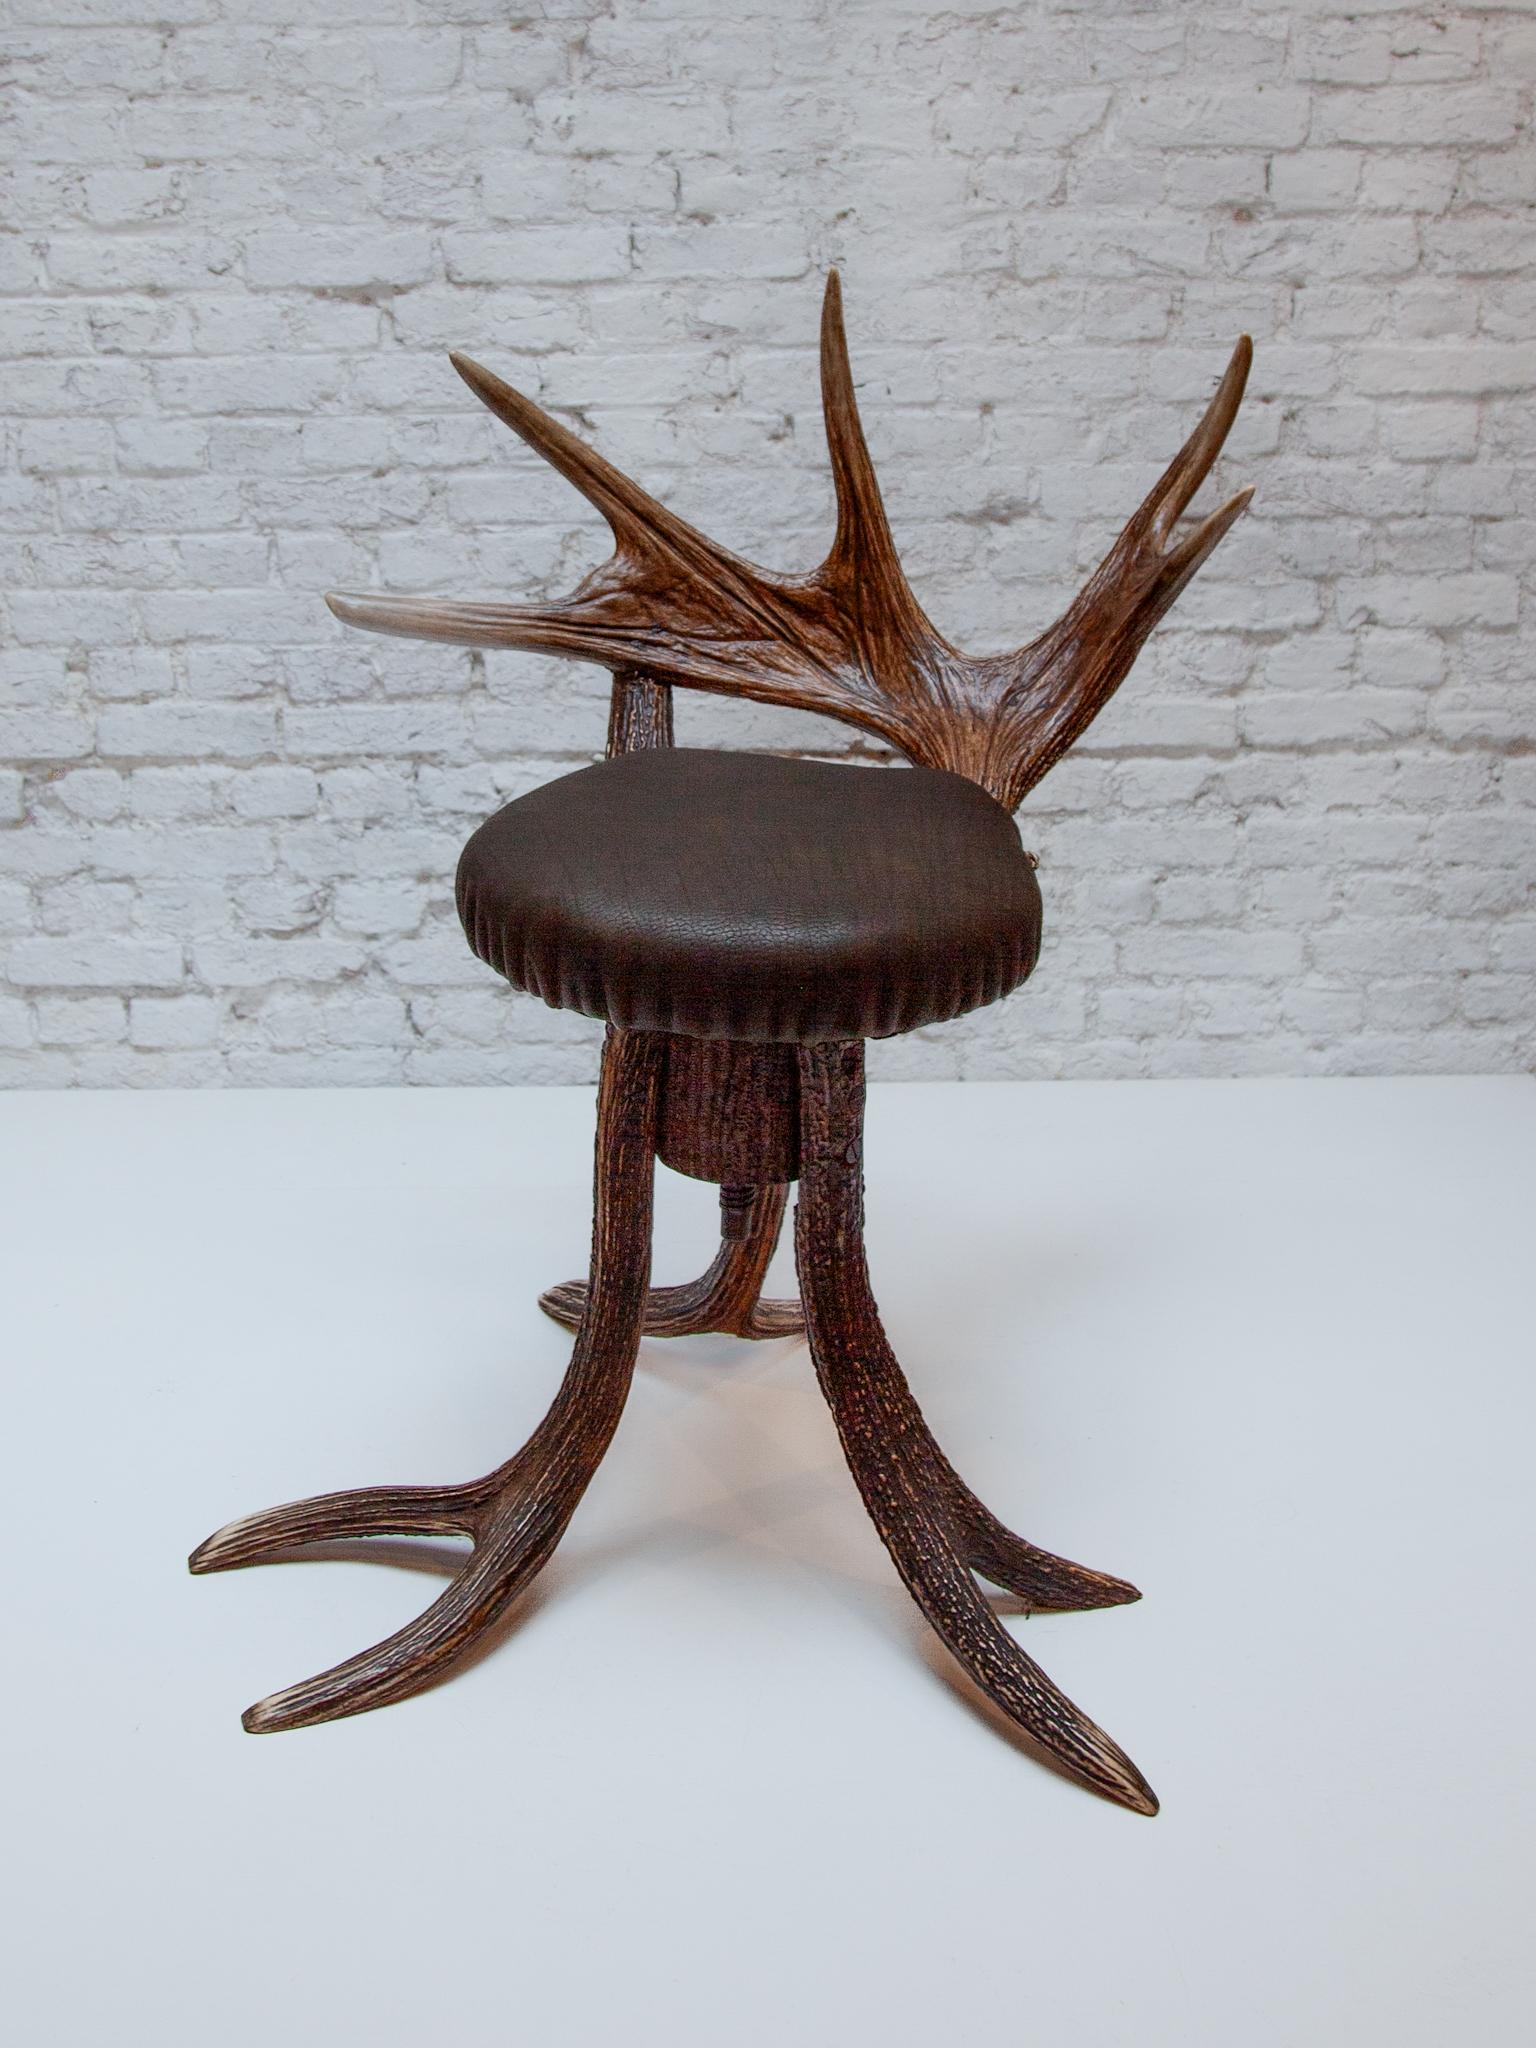 An exceptionally functional nature object seating element or high stool with a leather seat, an eccentric creation of deer horn in the continental style with a beautiful patina.
A masterpiece for every collection or for your Wunderkammer